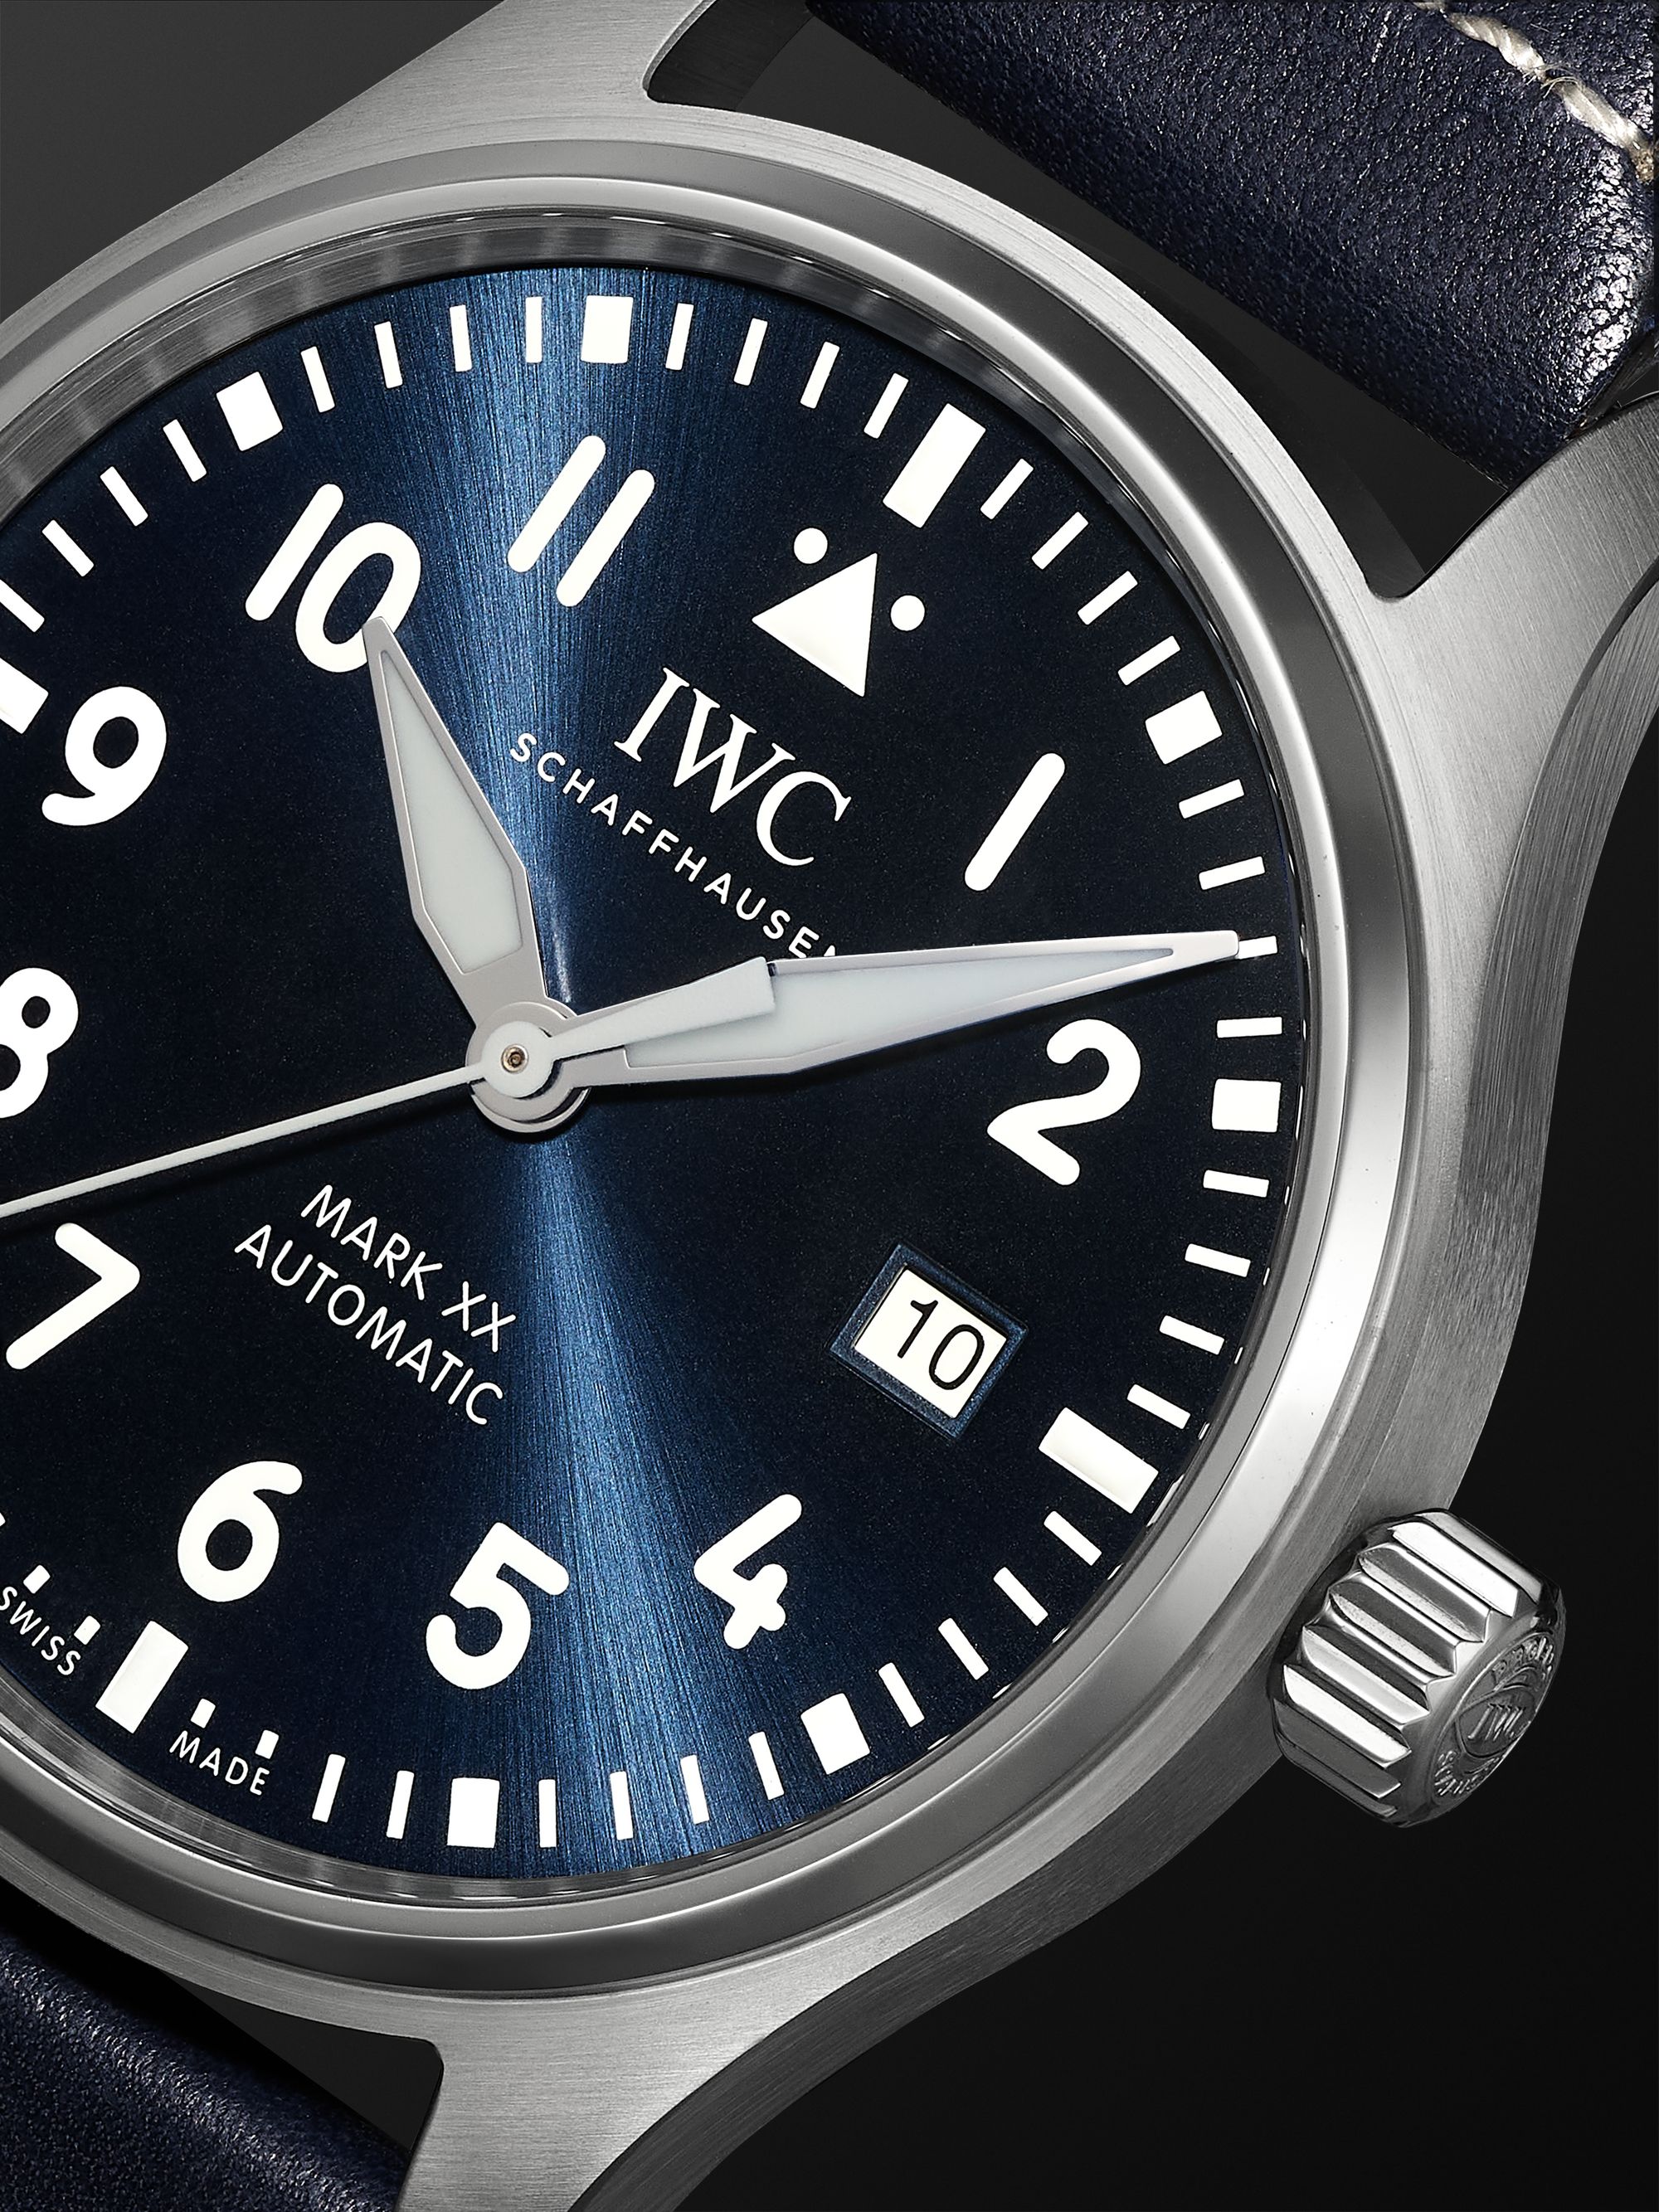 IWC SCHAFFHAUSEN Pilot's Mark XX Automatic 40mm Stainless Steel and Leather Watch, Ref. No. IWIW328203